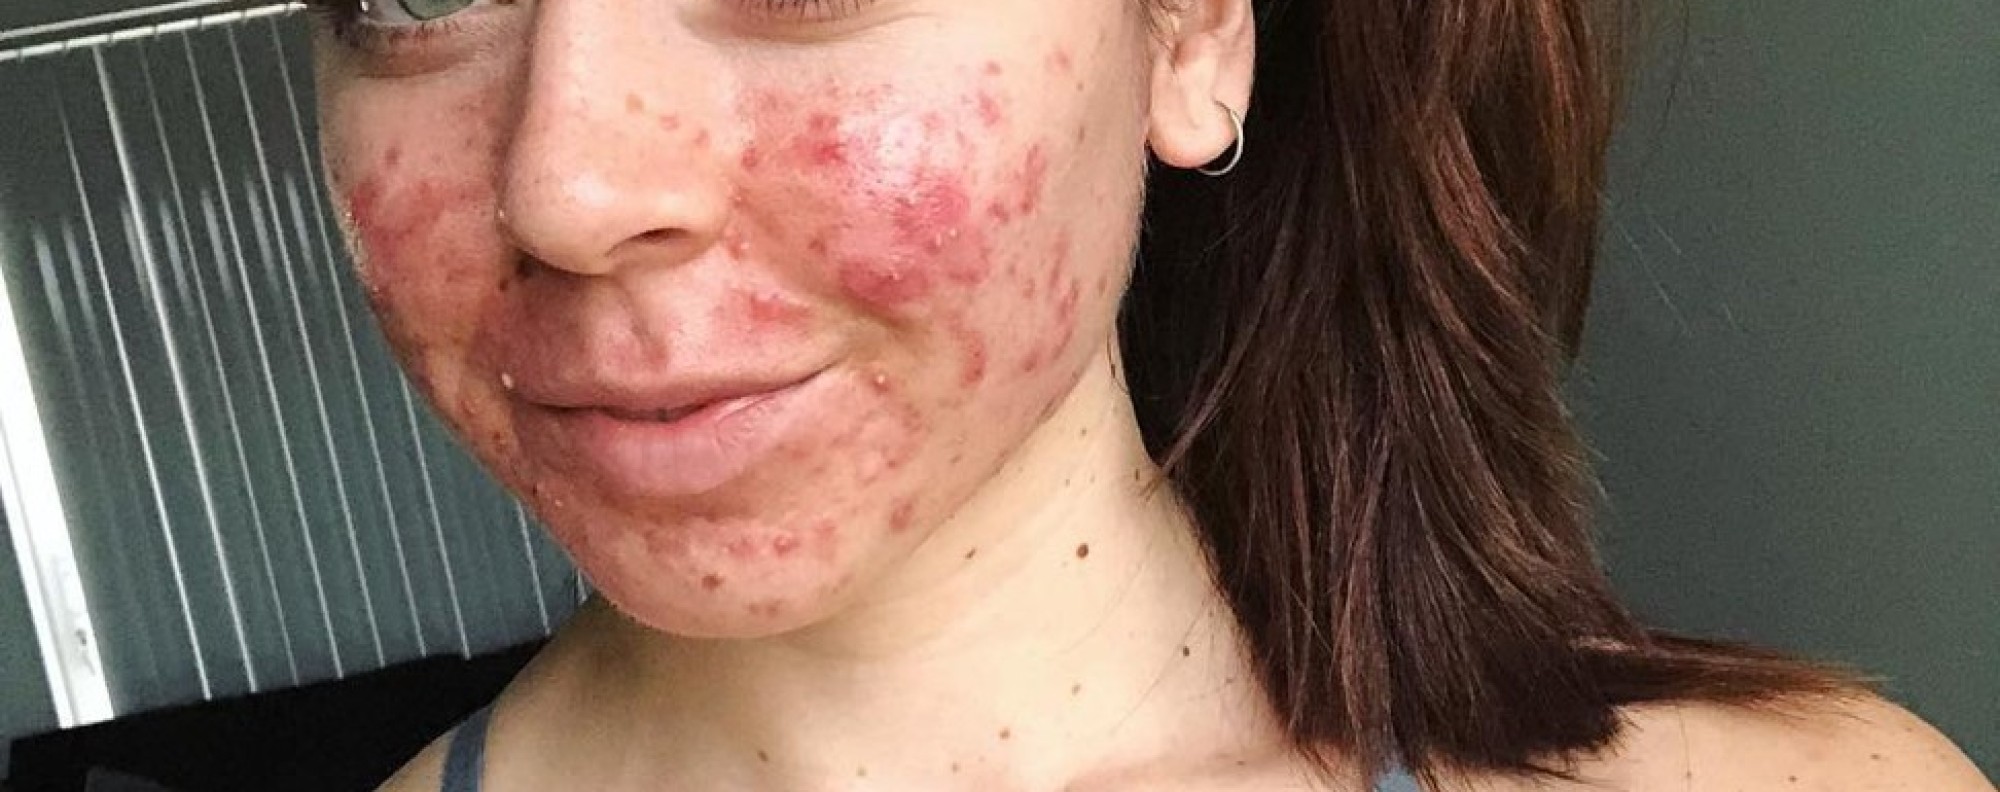 Acne: why some adults have it, how to treat it, and one Instagrammer's battle with chronic acne South China Morning Post